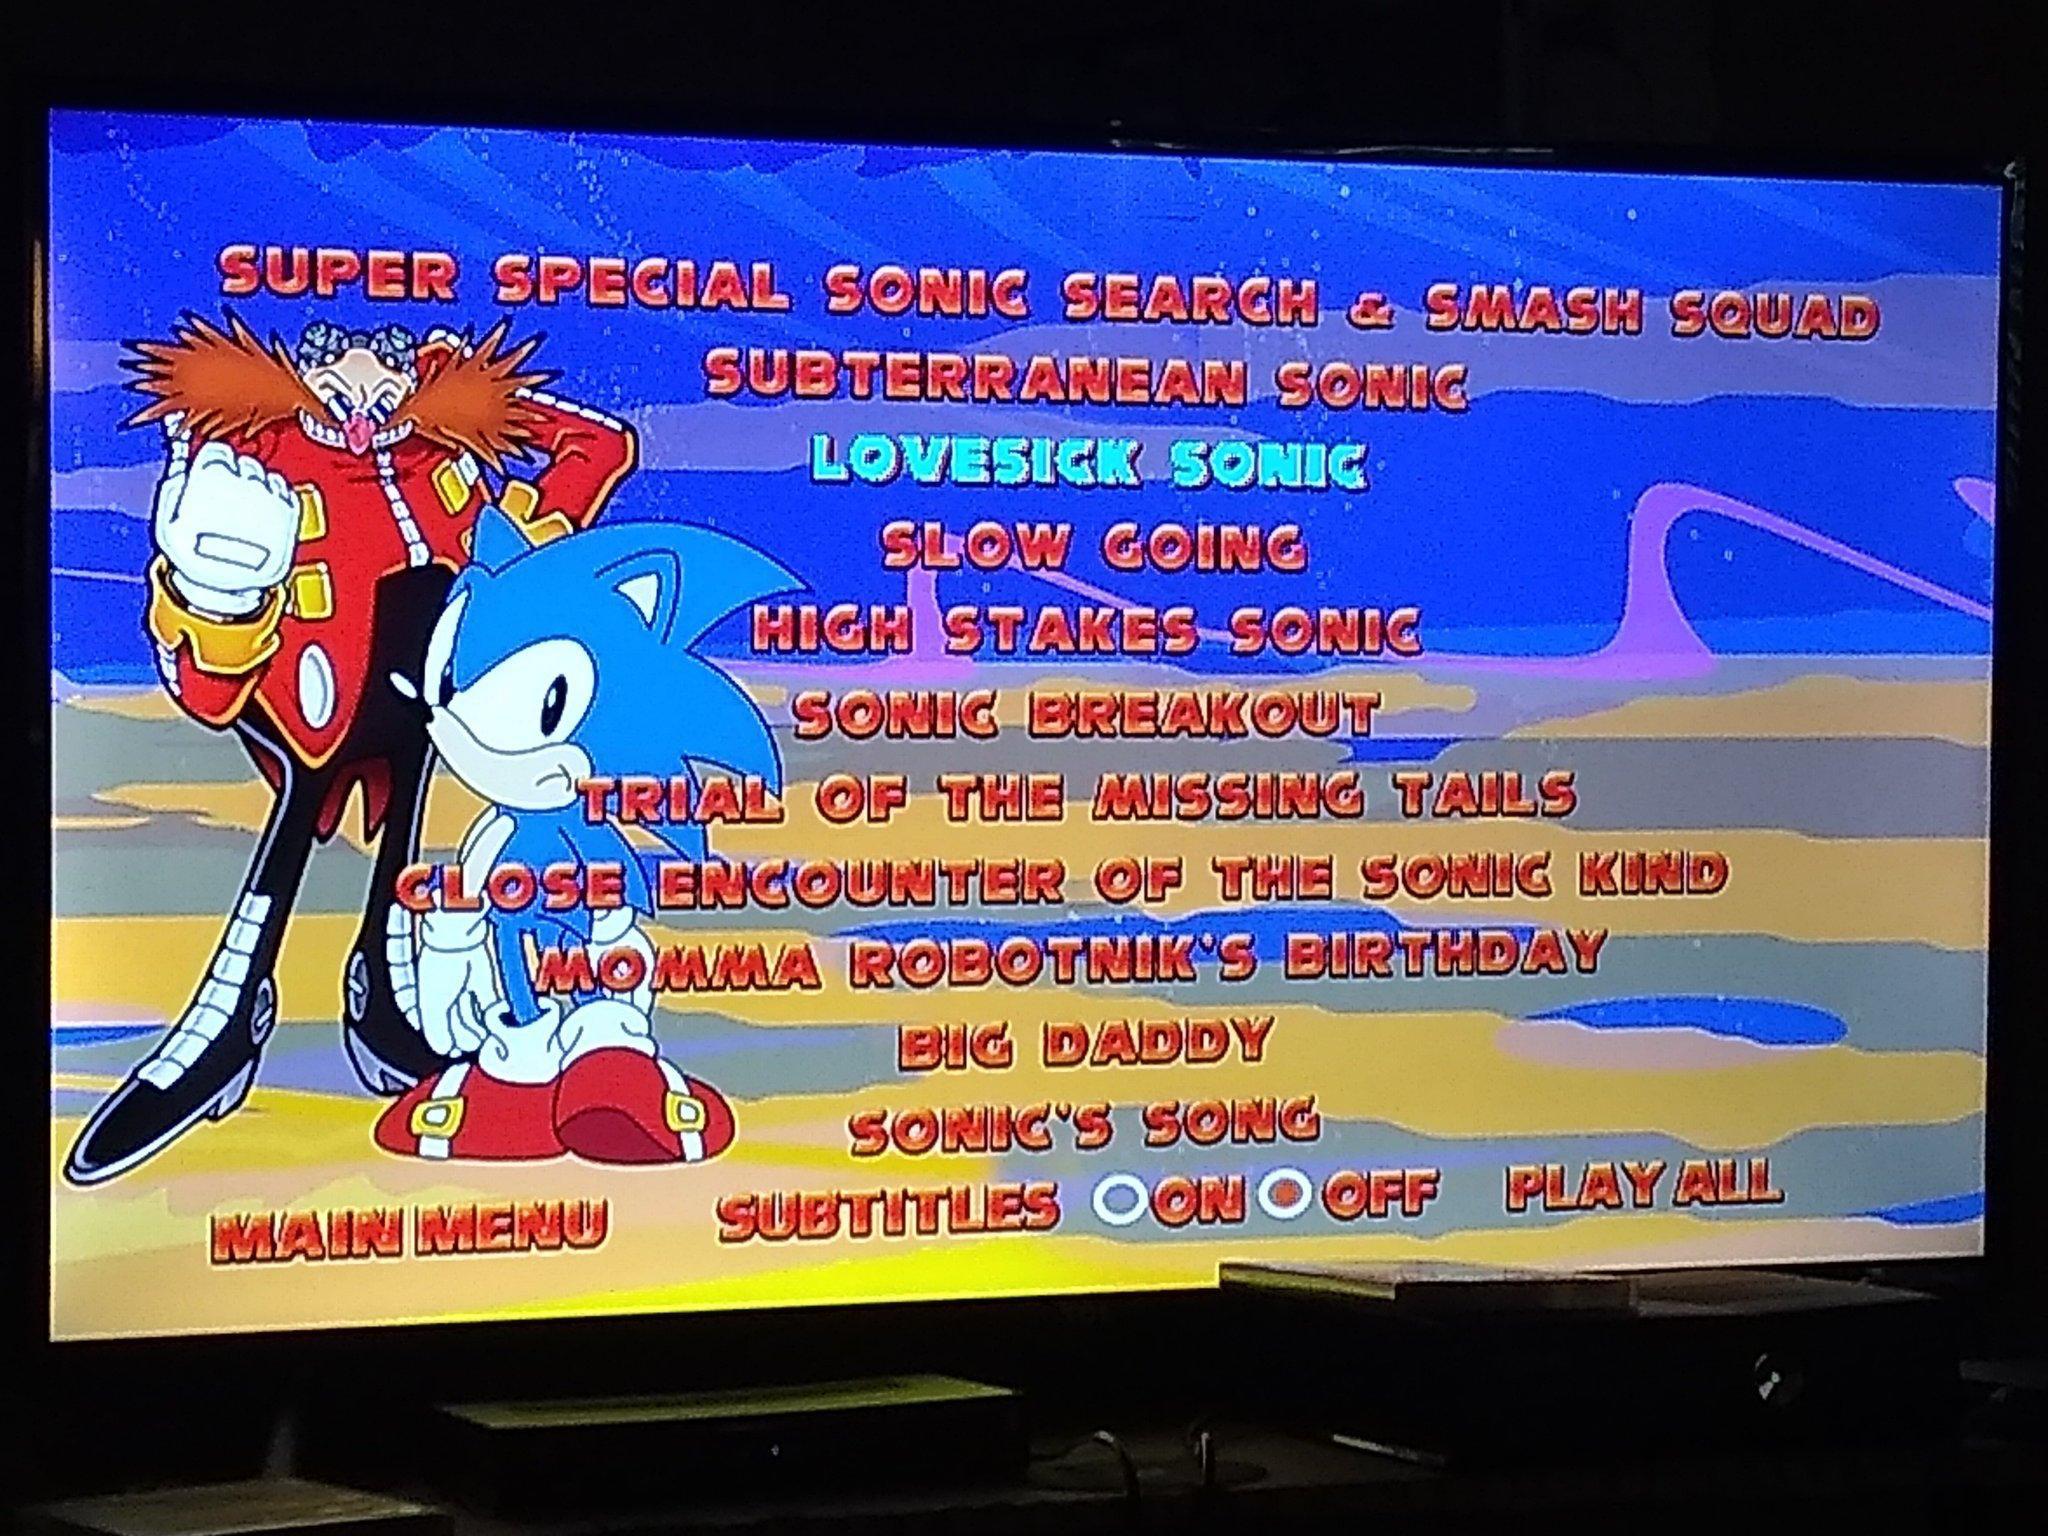 Allegedly This Is From The New Aosth Dvd Sonicthehedgehog